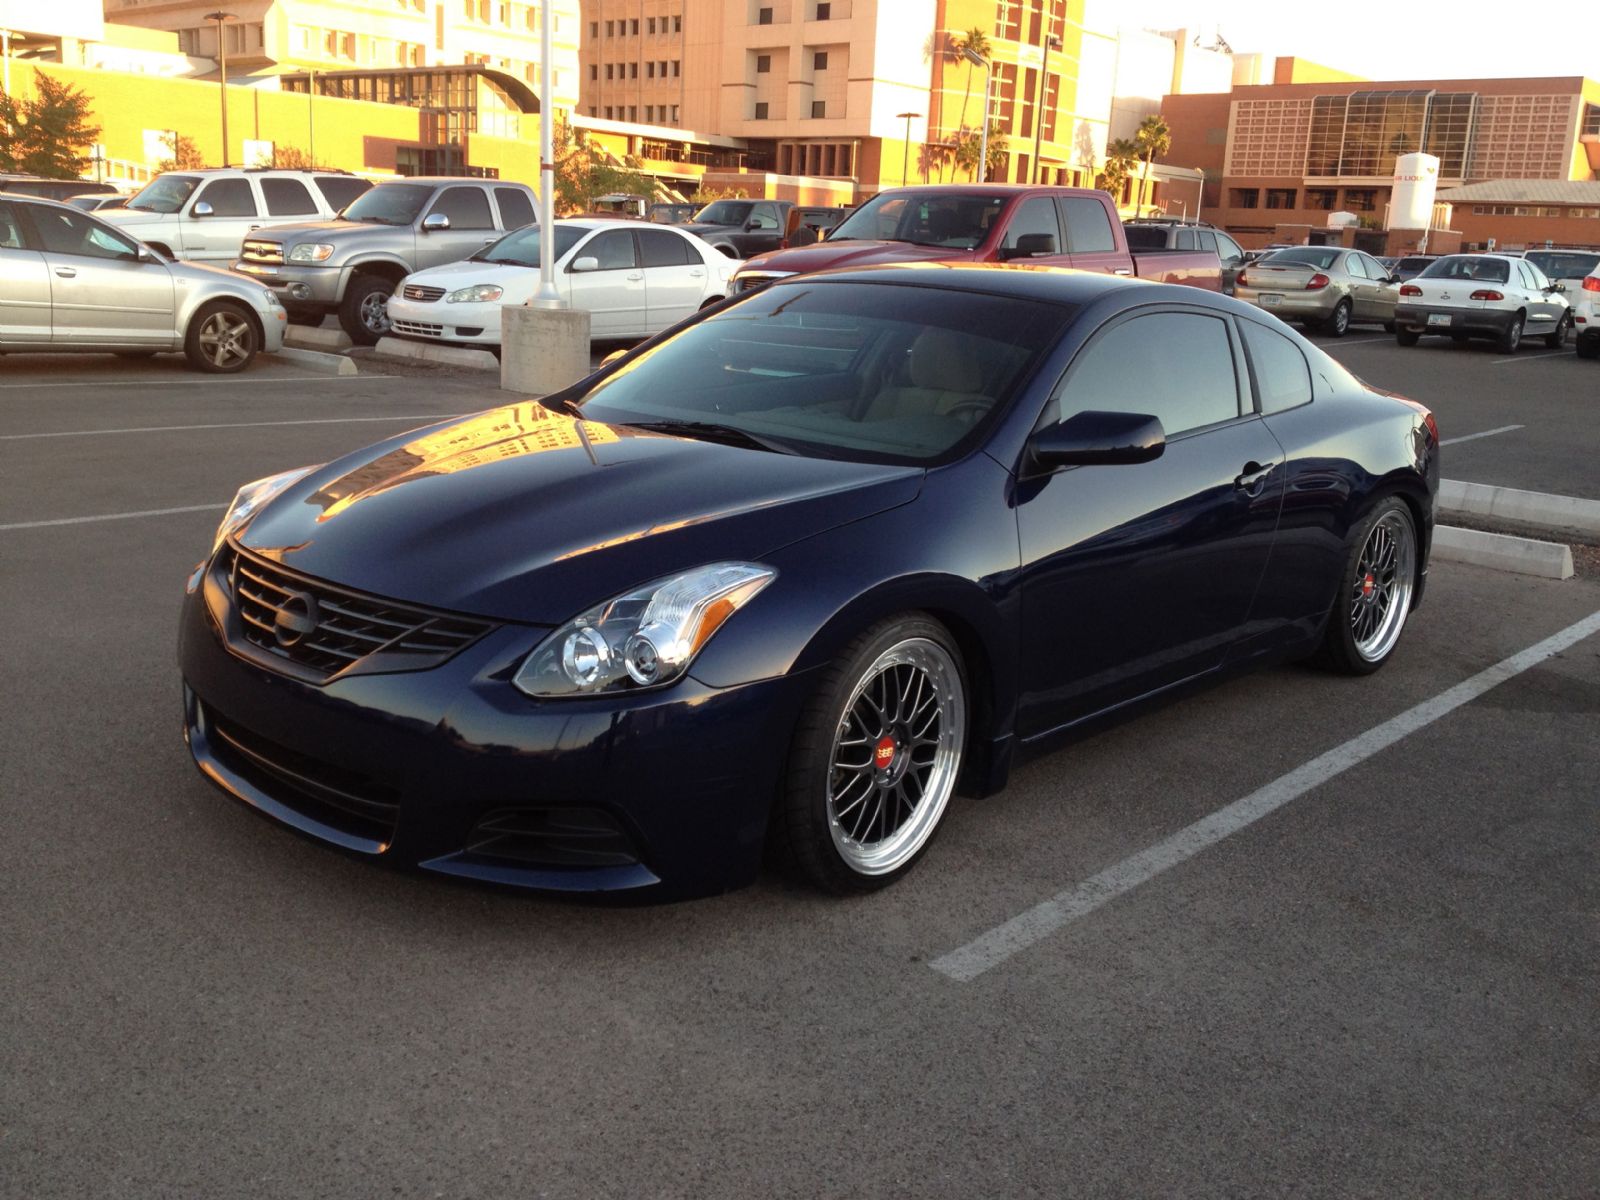 2010 Nissan Nissan Altima Coupe [Altima] Coupe 2.5S For Sale | Tucson